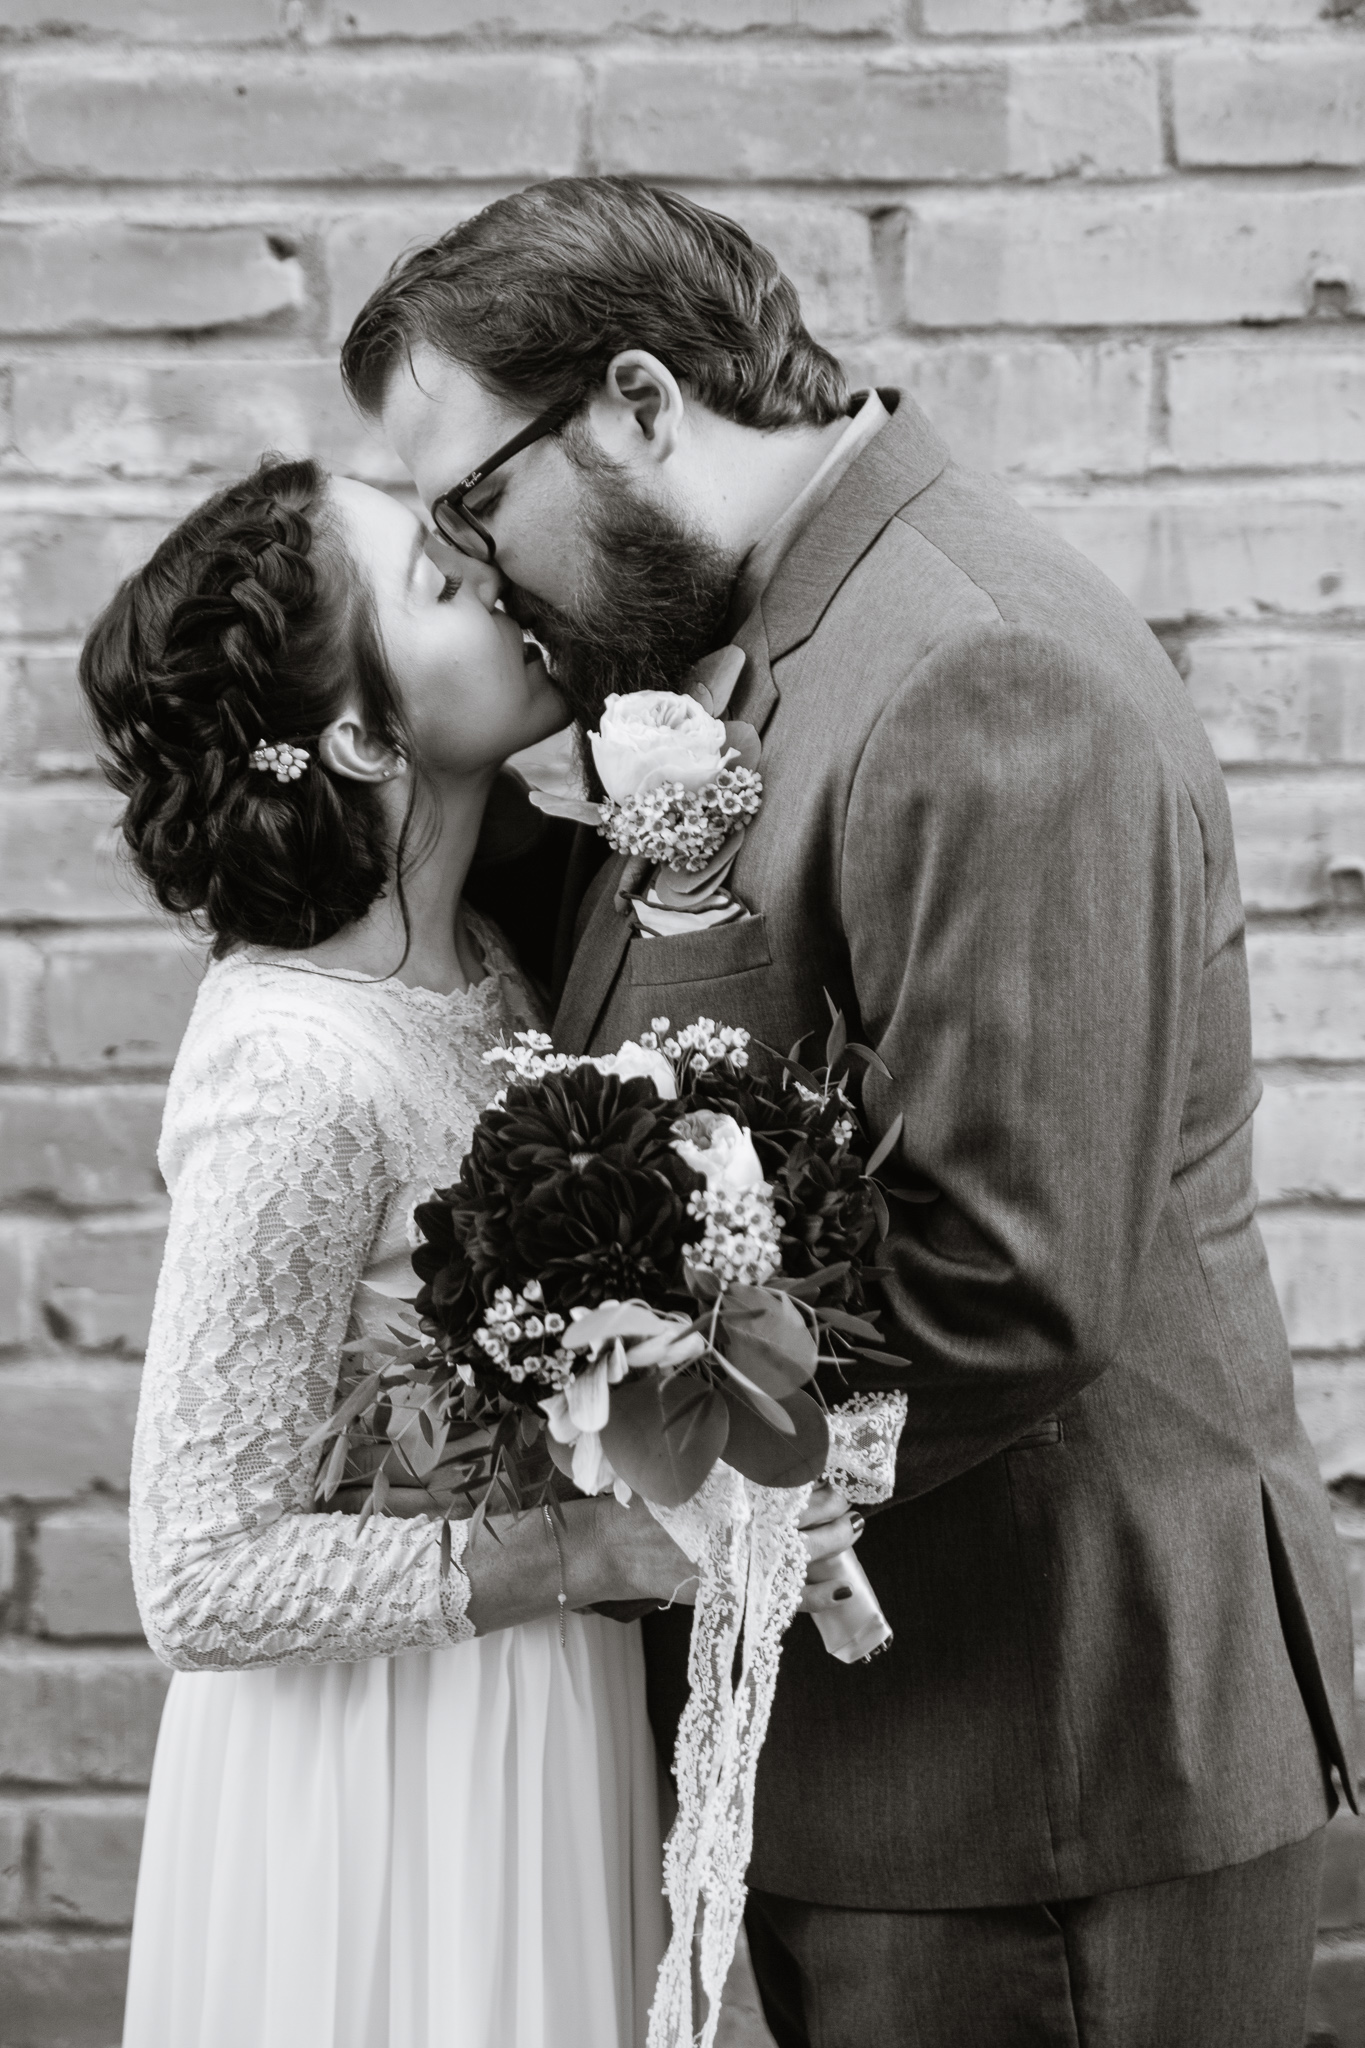 Black and white image of vintage inspired bride and groom kissing.